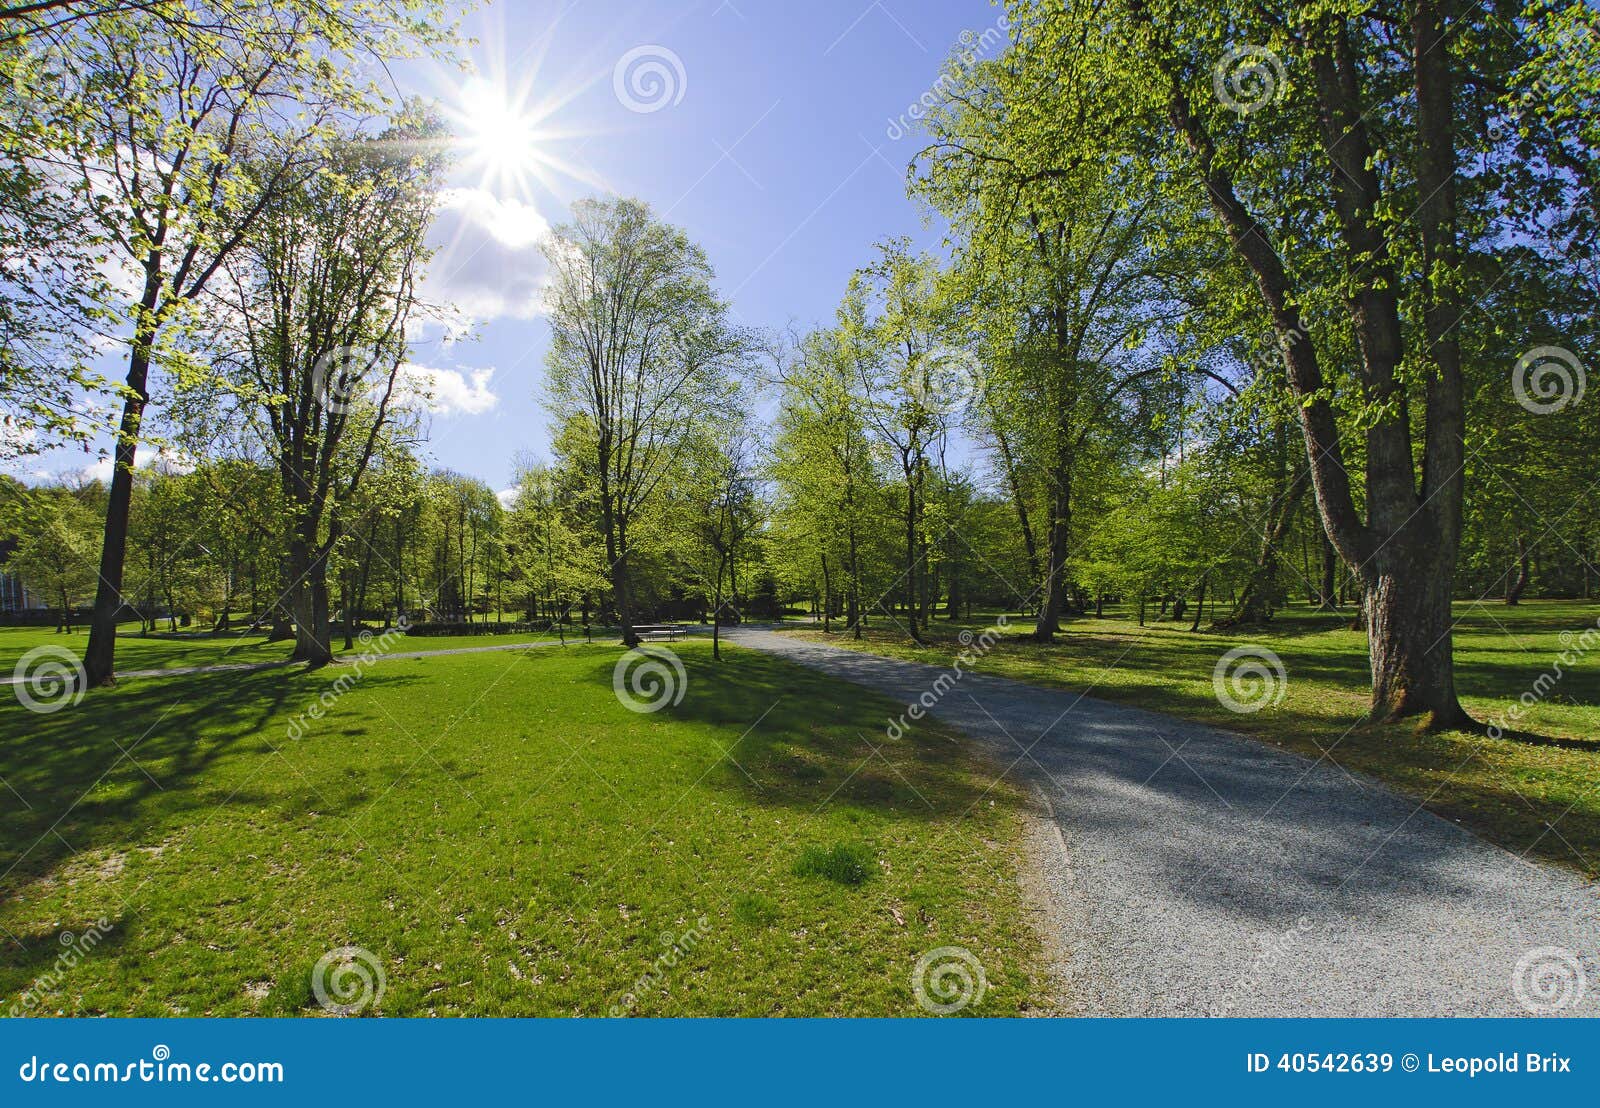 Park and bright sun stock image. Image of light, spring - 40542639